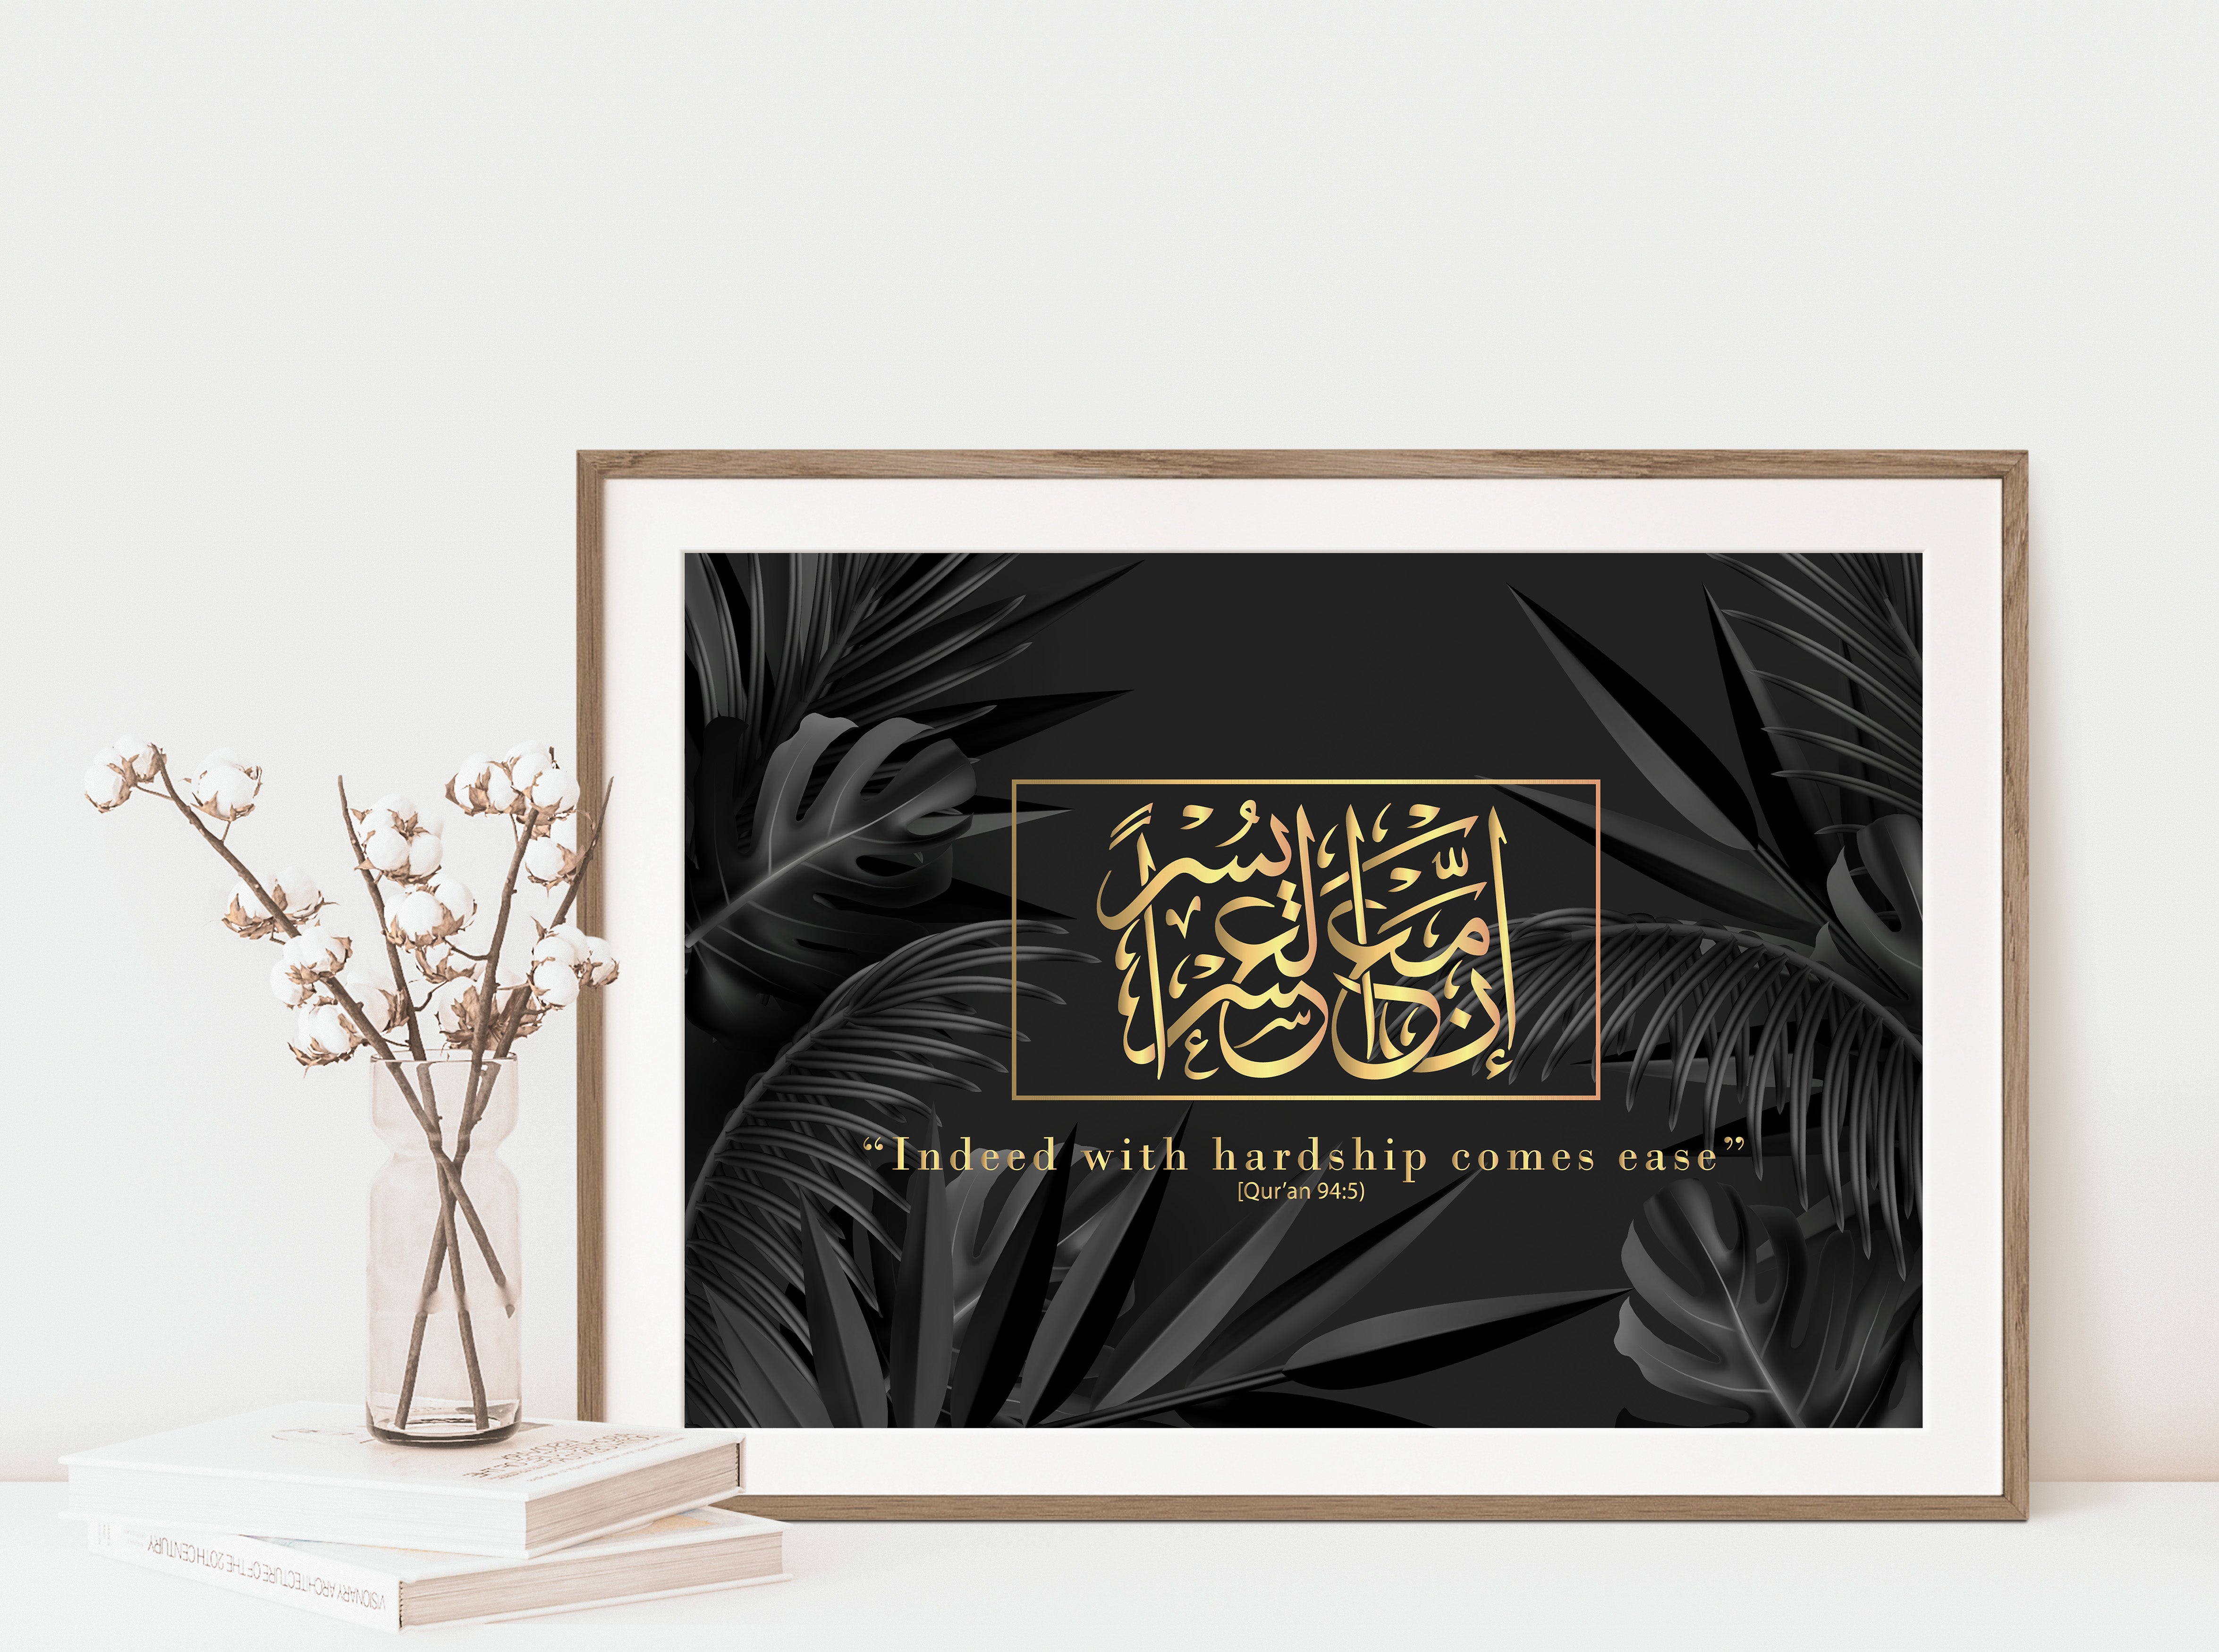 Quote from the Qur'an "Indeed with hardship comes ease" | Islamic wall art - Peaceful Arts ltd